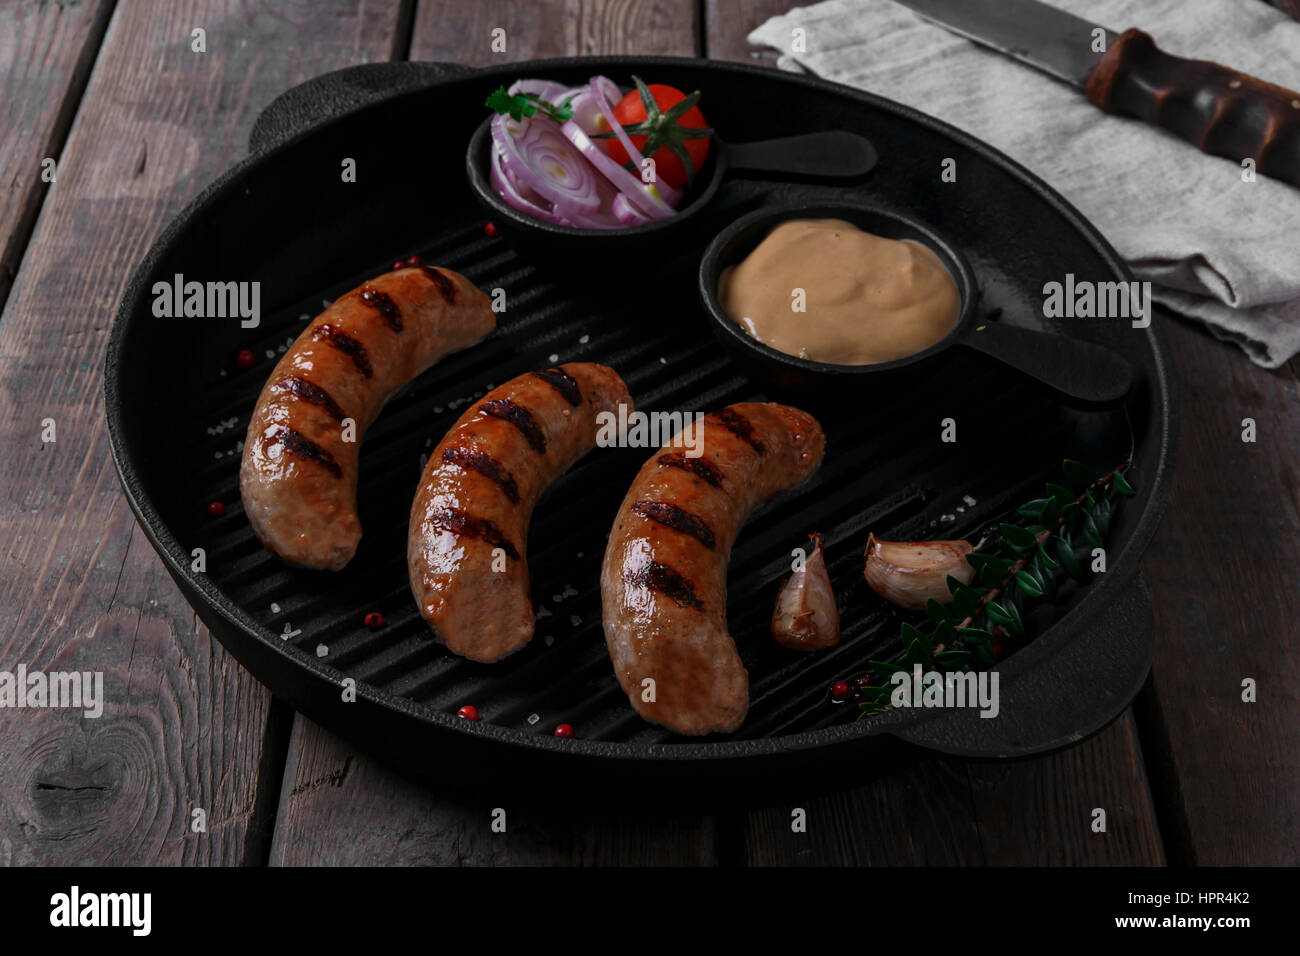 homemade grilled sausage with spices on grill Stock Photo